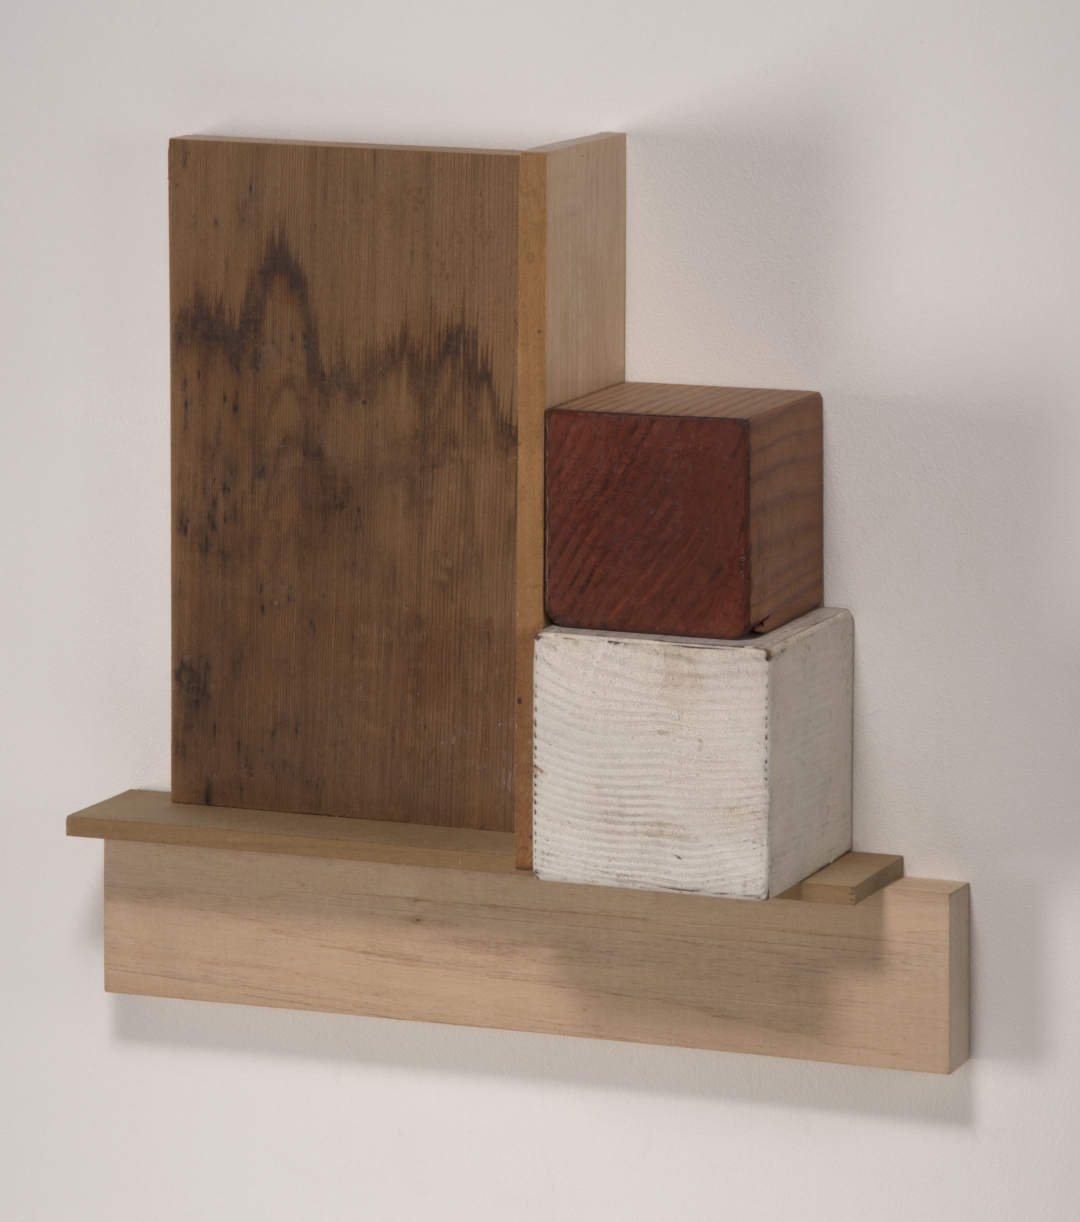 Richard Fleischner, <i>Untitled Construction</i>, 2019, wood and gouache, 10 7/8 x 11 1/8 x 3 inches (27.6 x 28.3 x 7.6 cm)